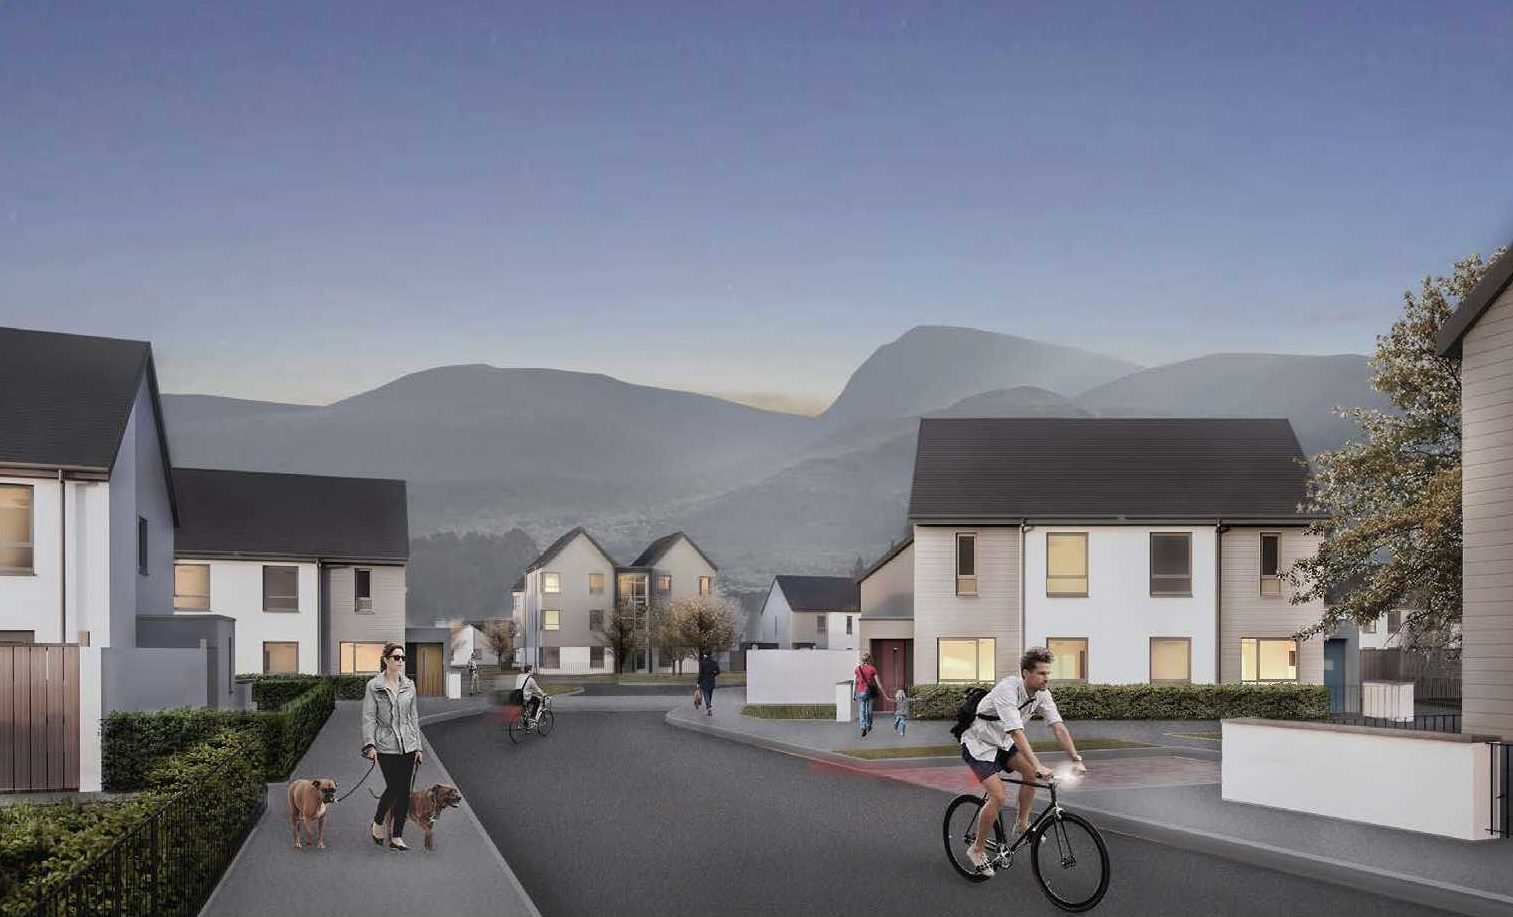 Artist impression showing the proposed housing development in Fort William.